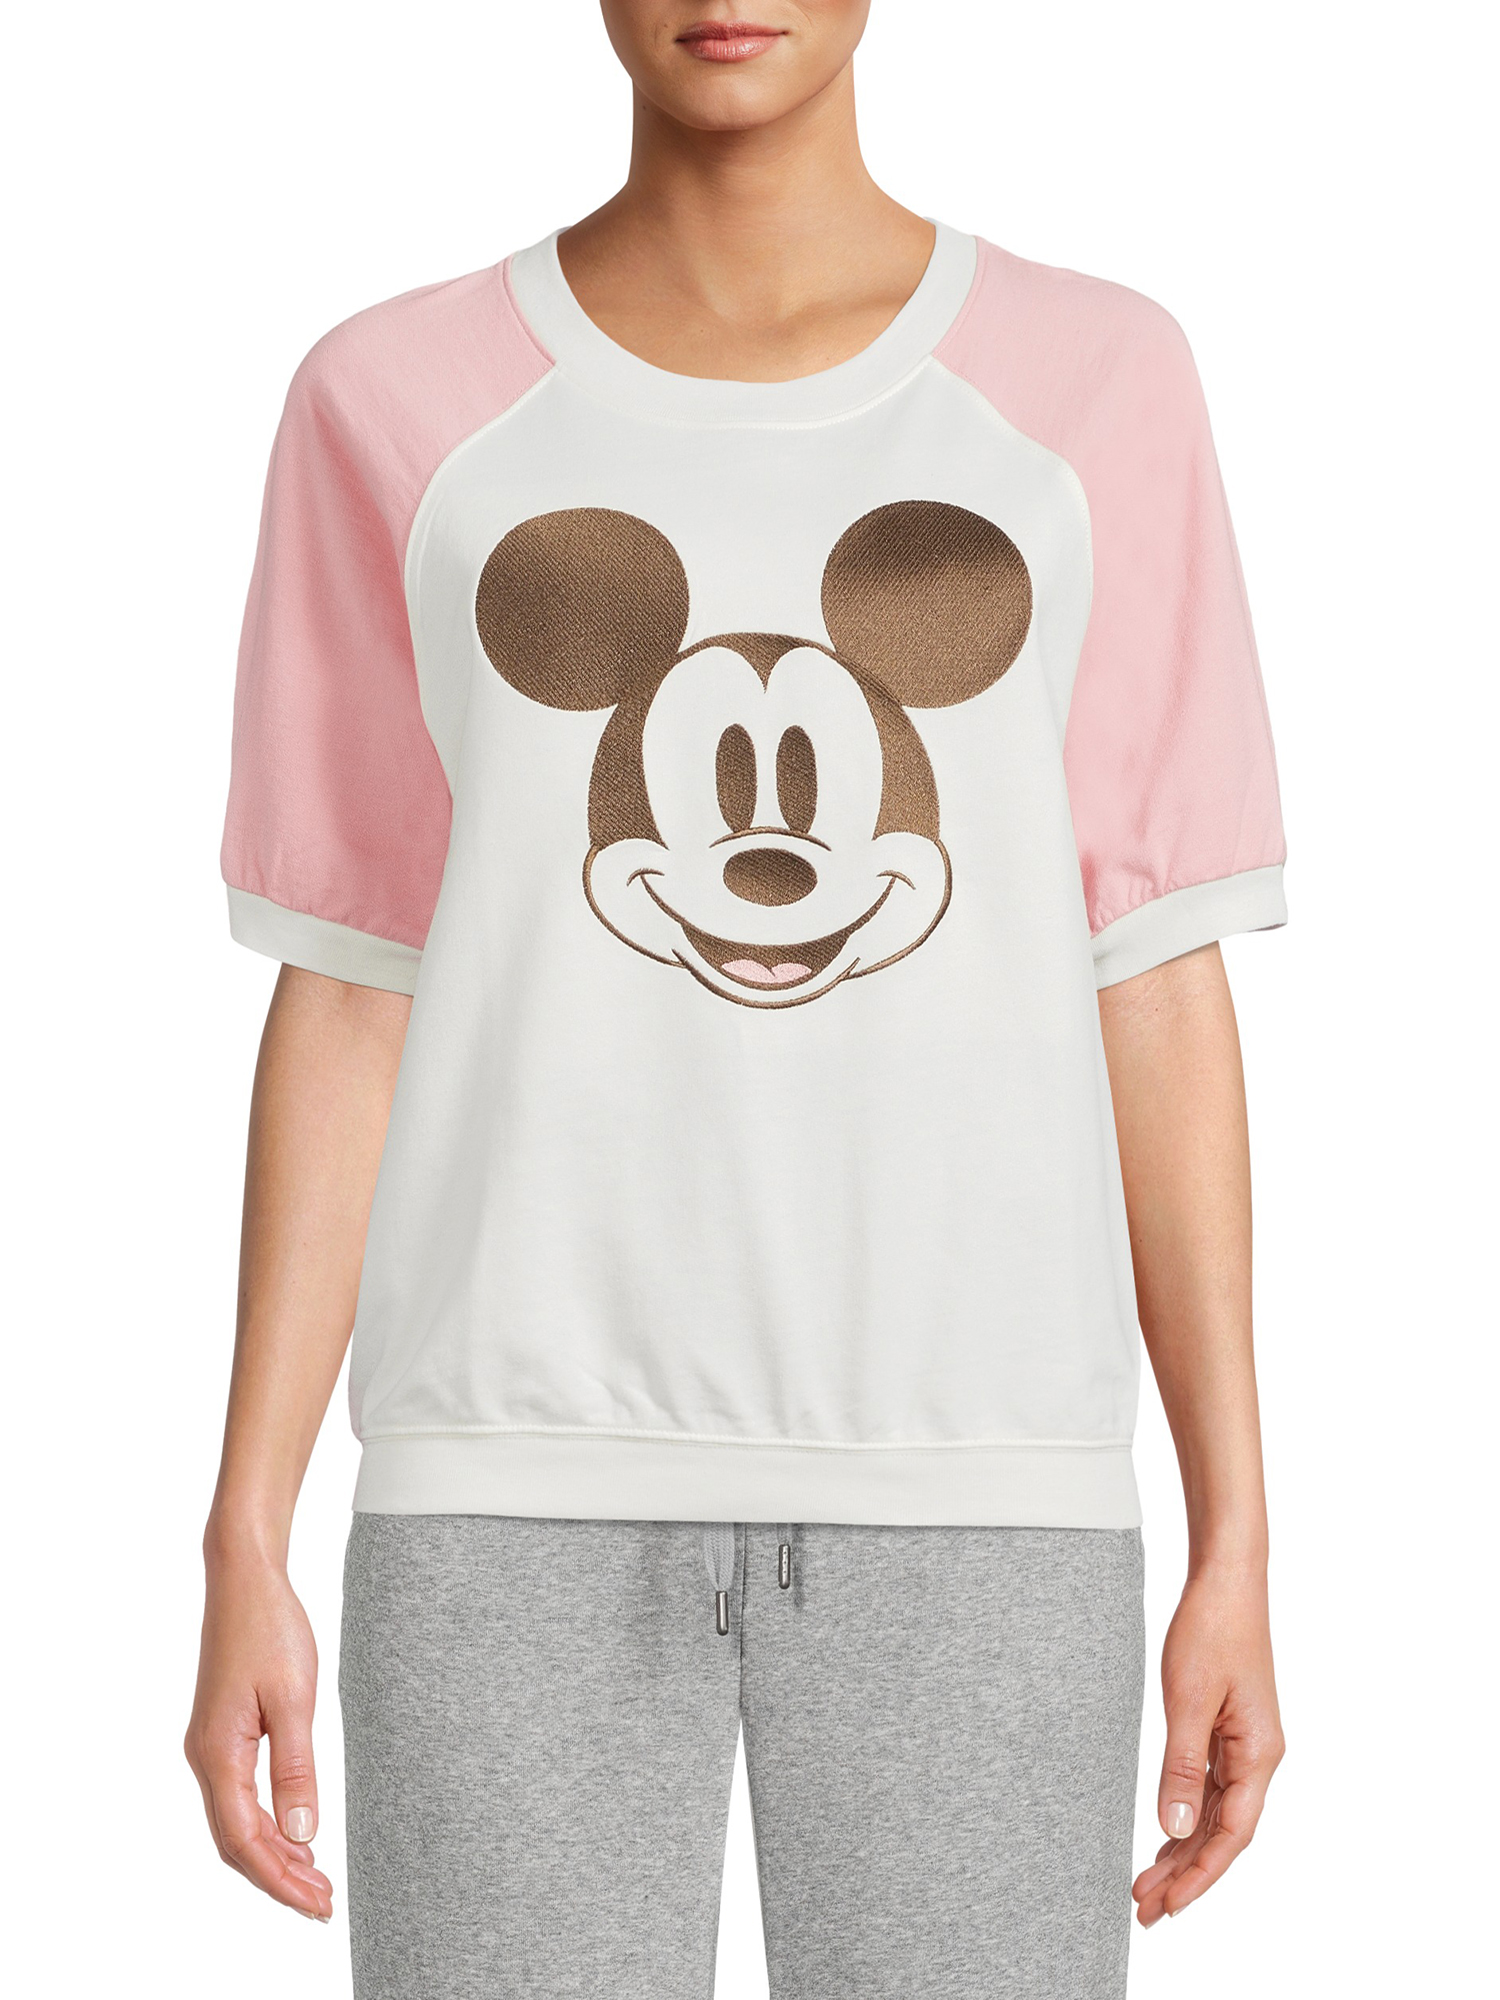 Disney Women's and Women's Plus Mickey Mouse Short Sleeve Top - image 1 of 5